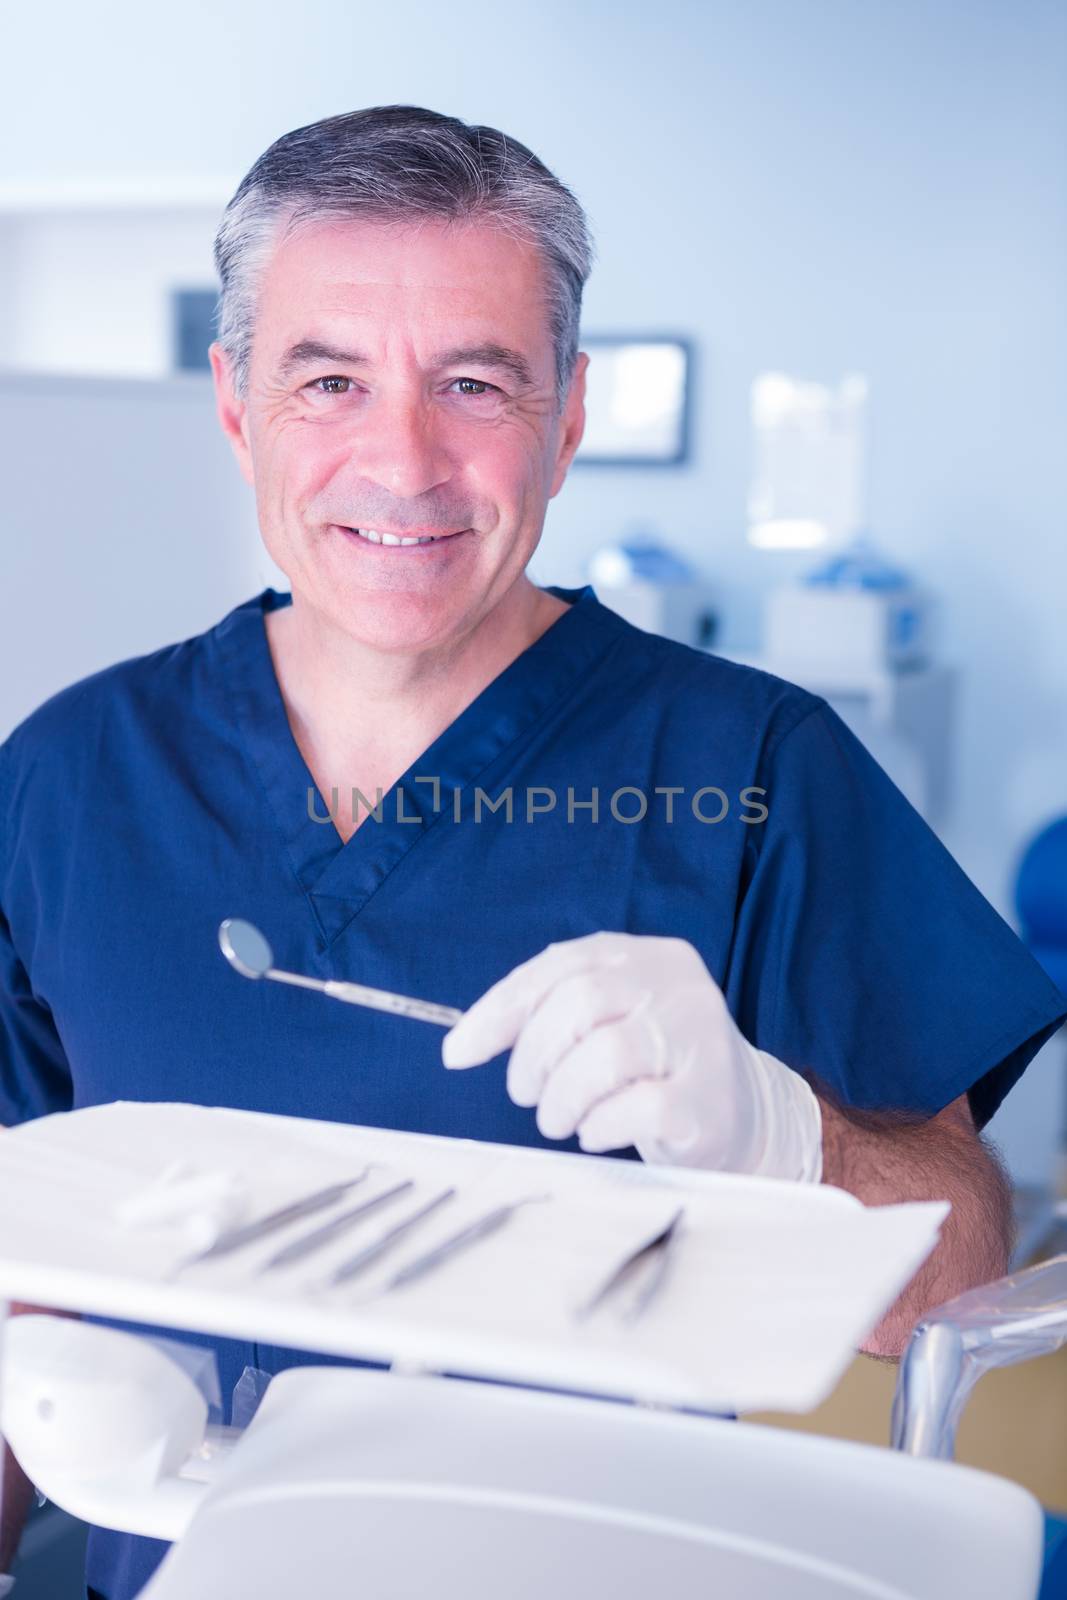 Dentist in blue scrubs smiling at camera holding tools by Wavebreakmedia